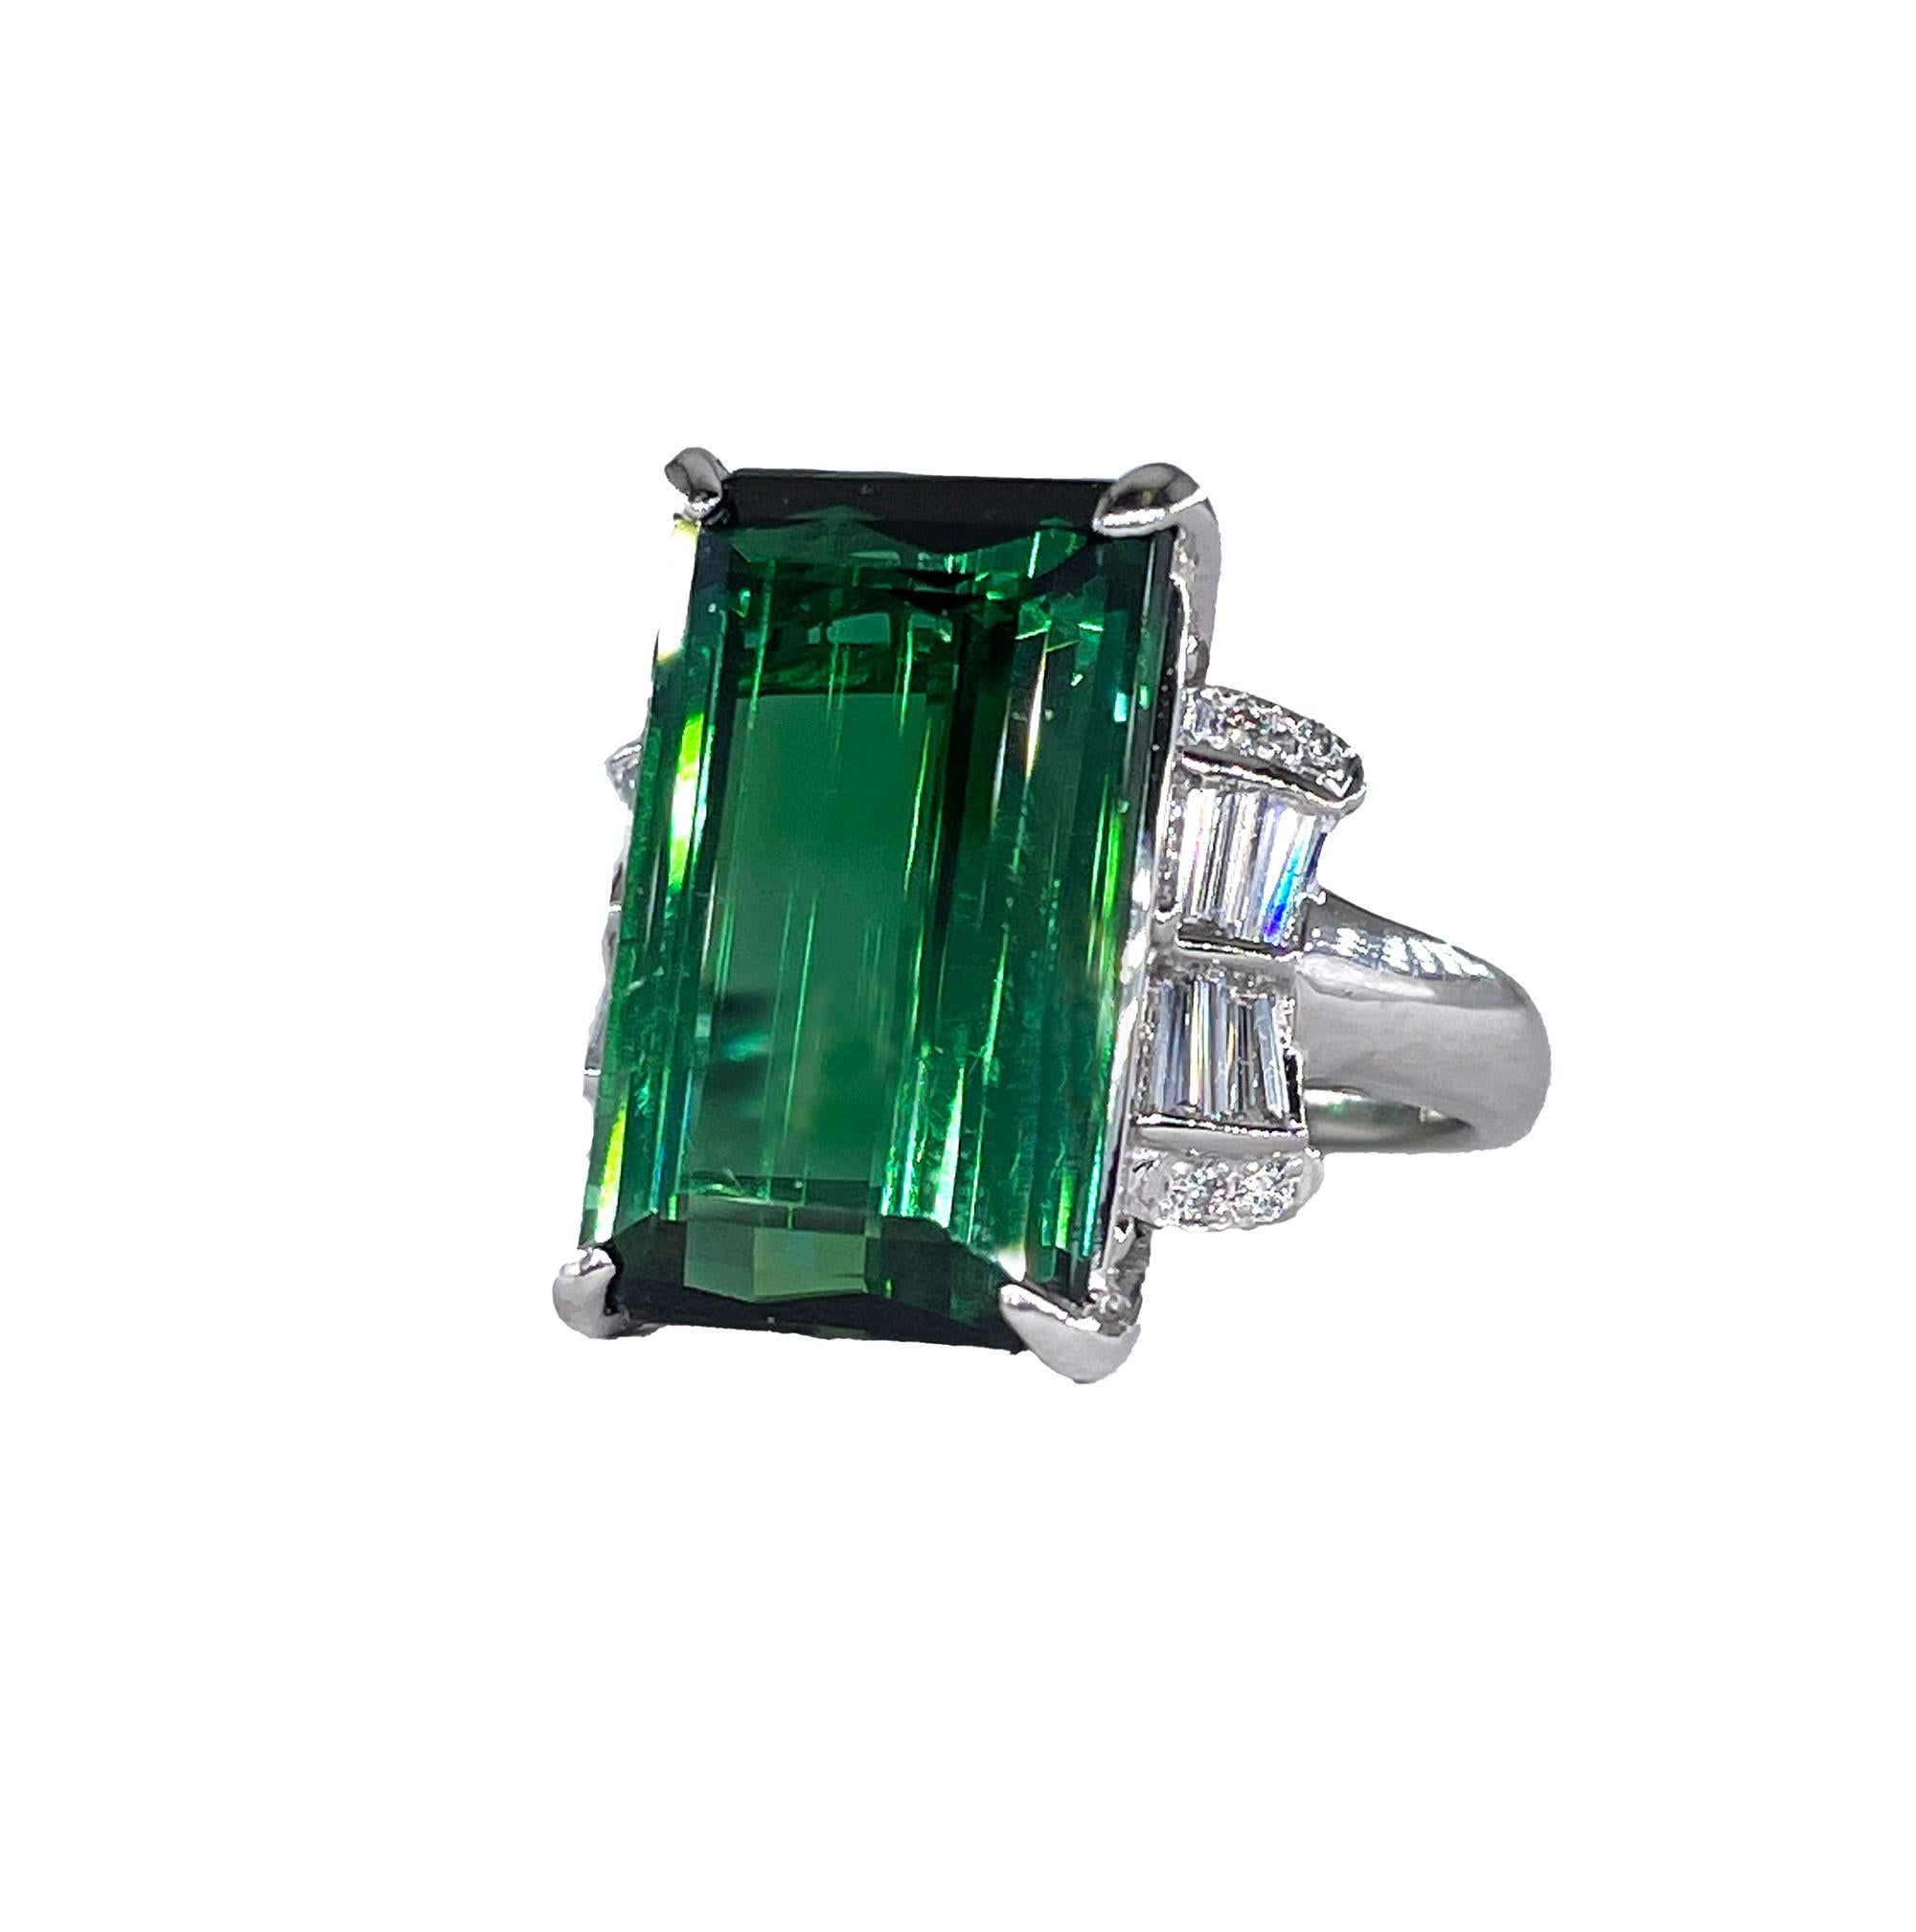 Original Art Deco GIA 12.18ct Green Tourmaline Diamond Platinum Cocktail Ring.

The finest examples of late Art Deco engagement rings were hand fabricated and impeccably finished with hand tooled engraving. No expense was spared in producing these